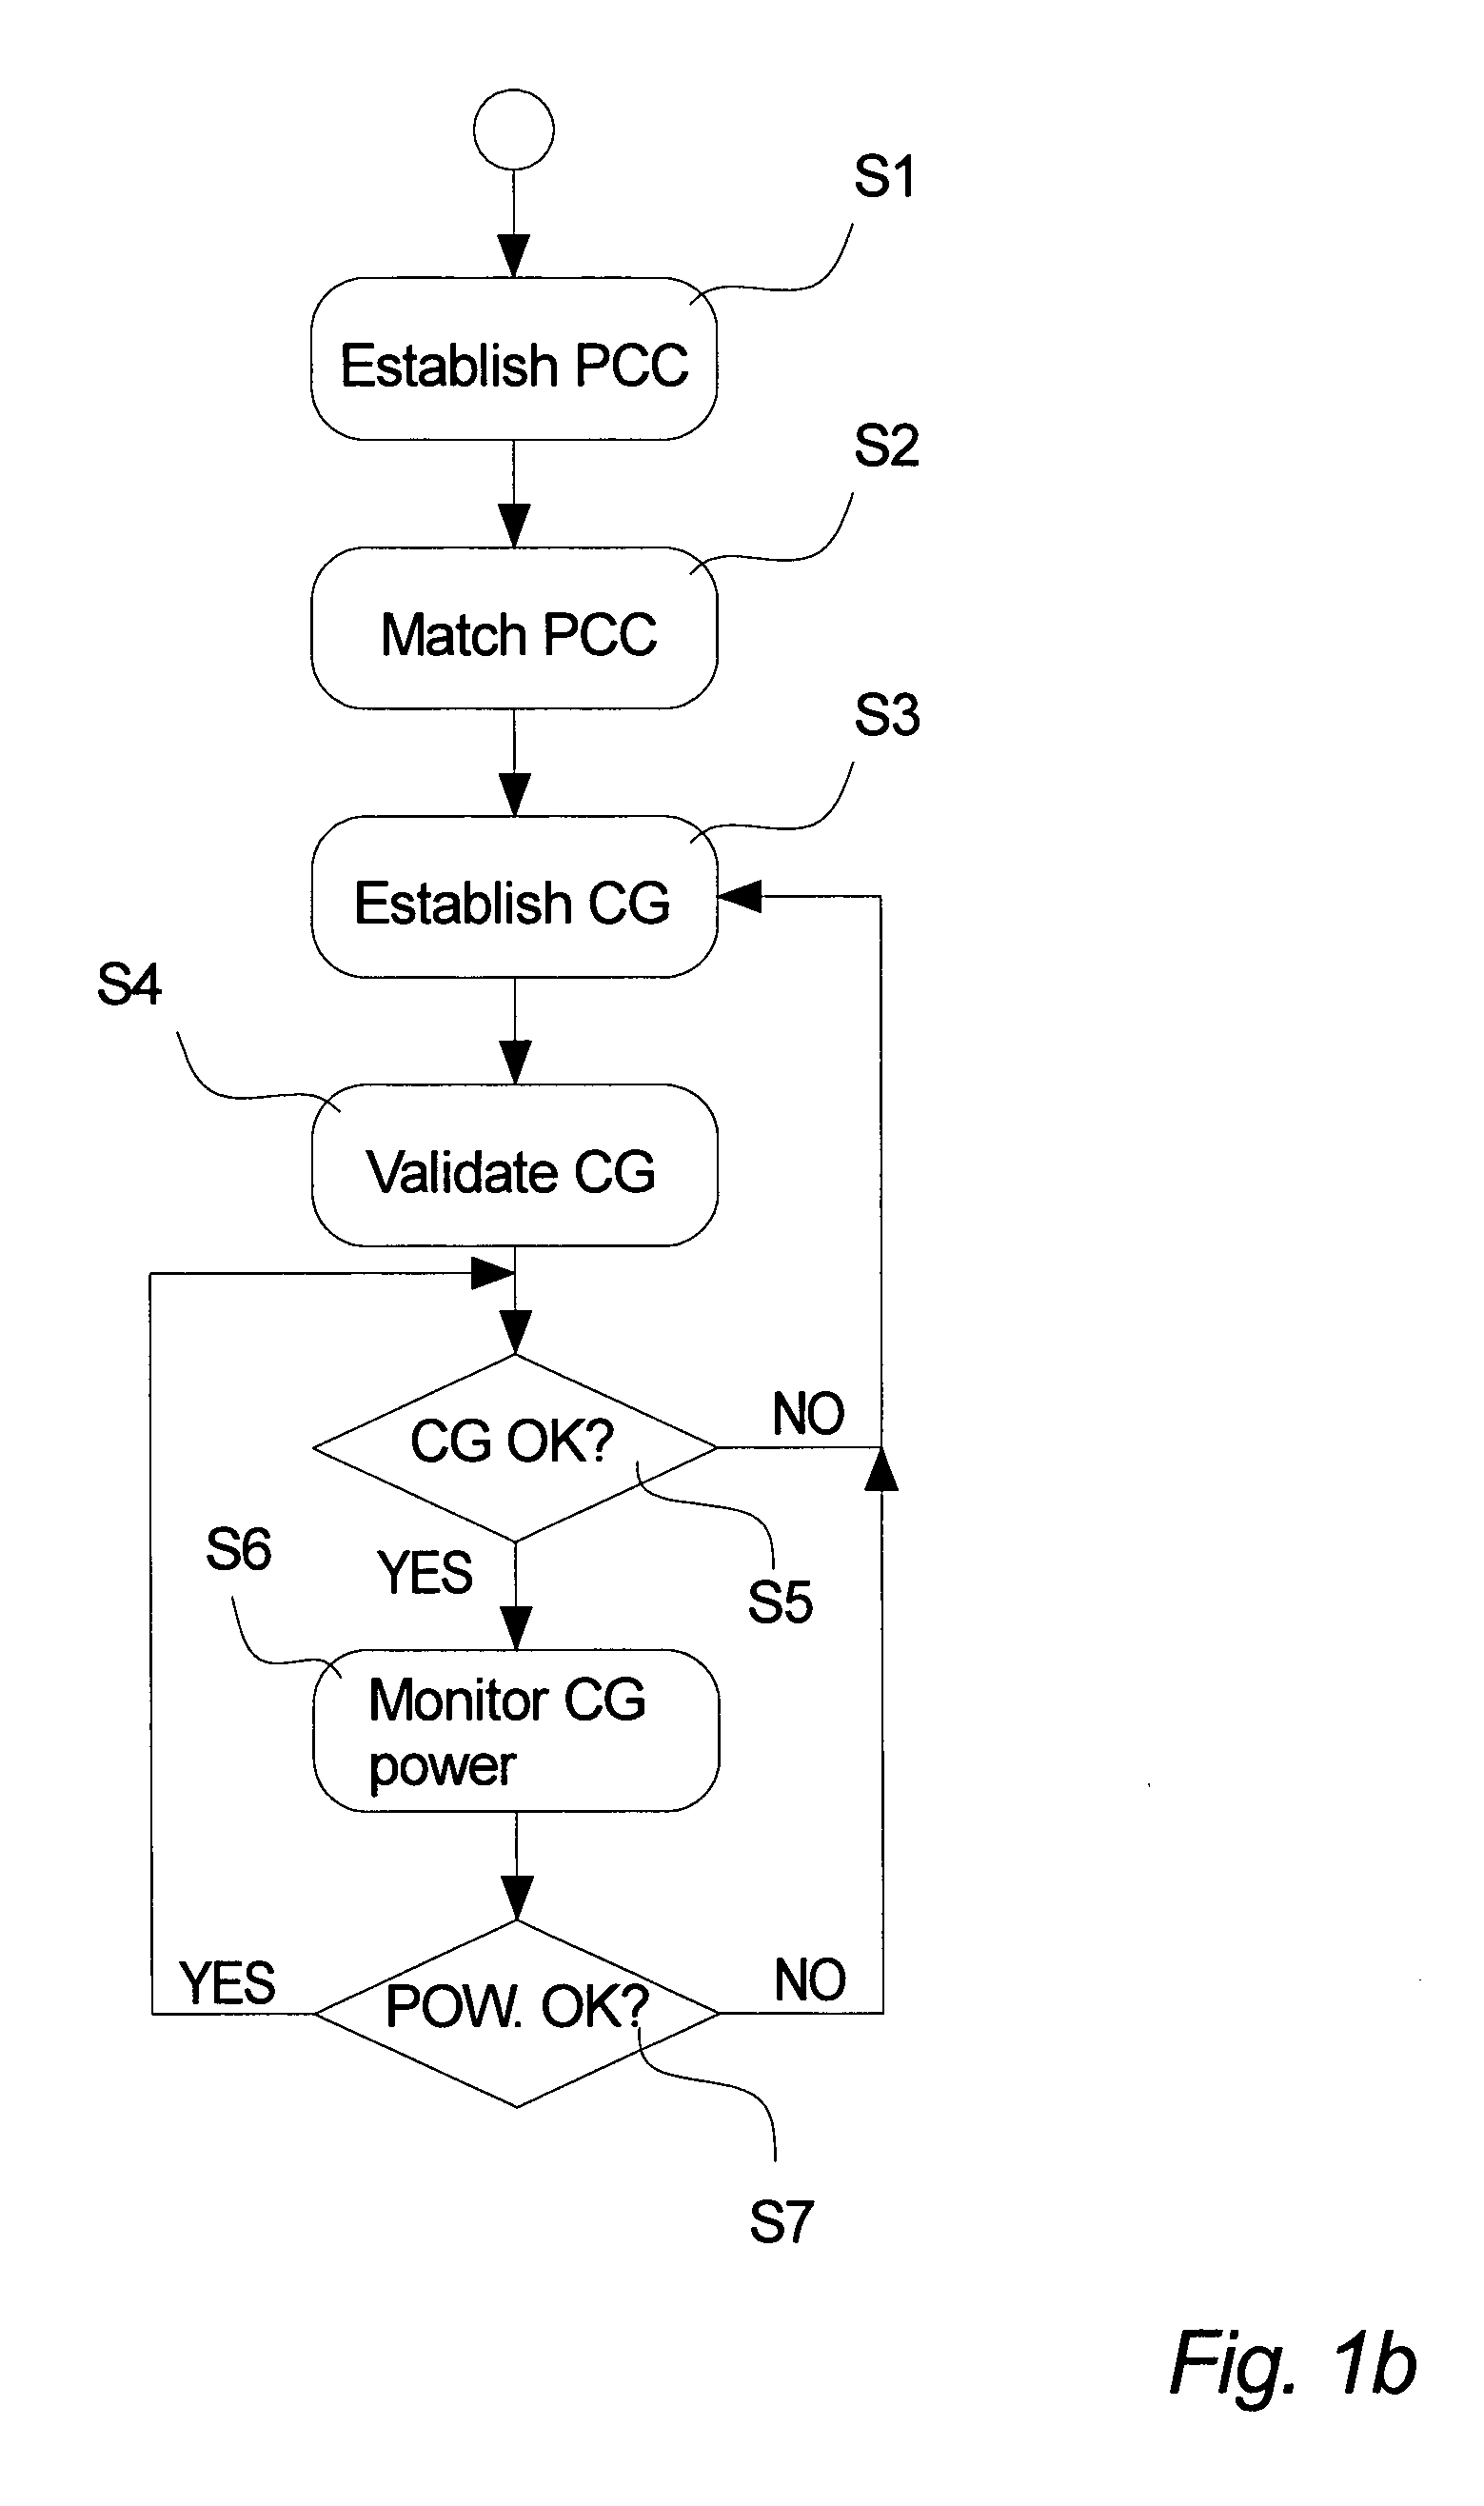 Method and Apparatus for Managing Transmission of Power in a Power Transmission Network